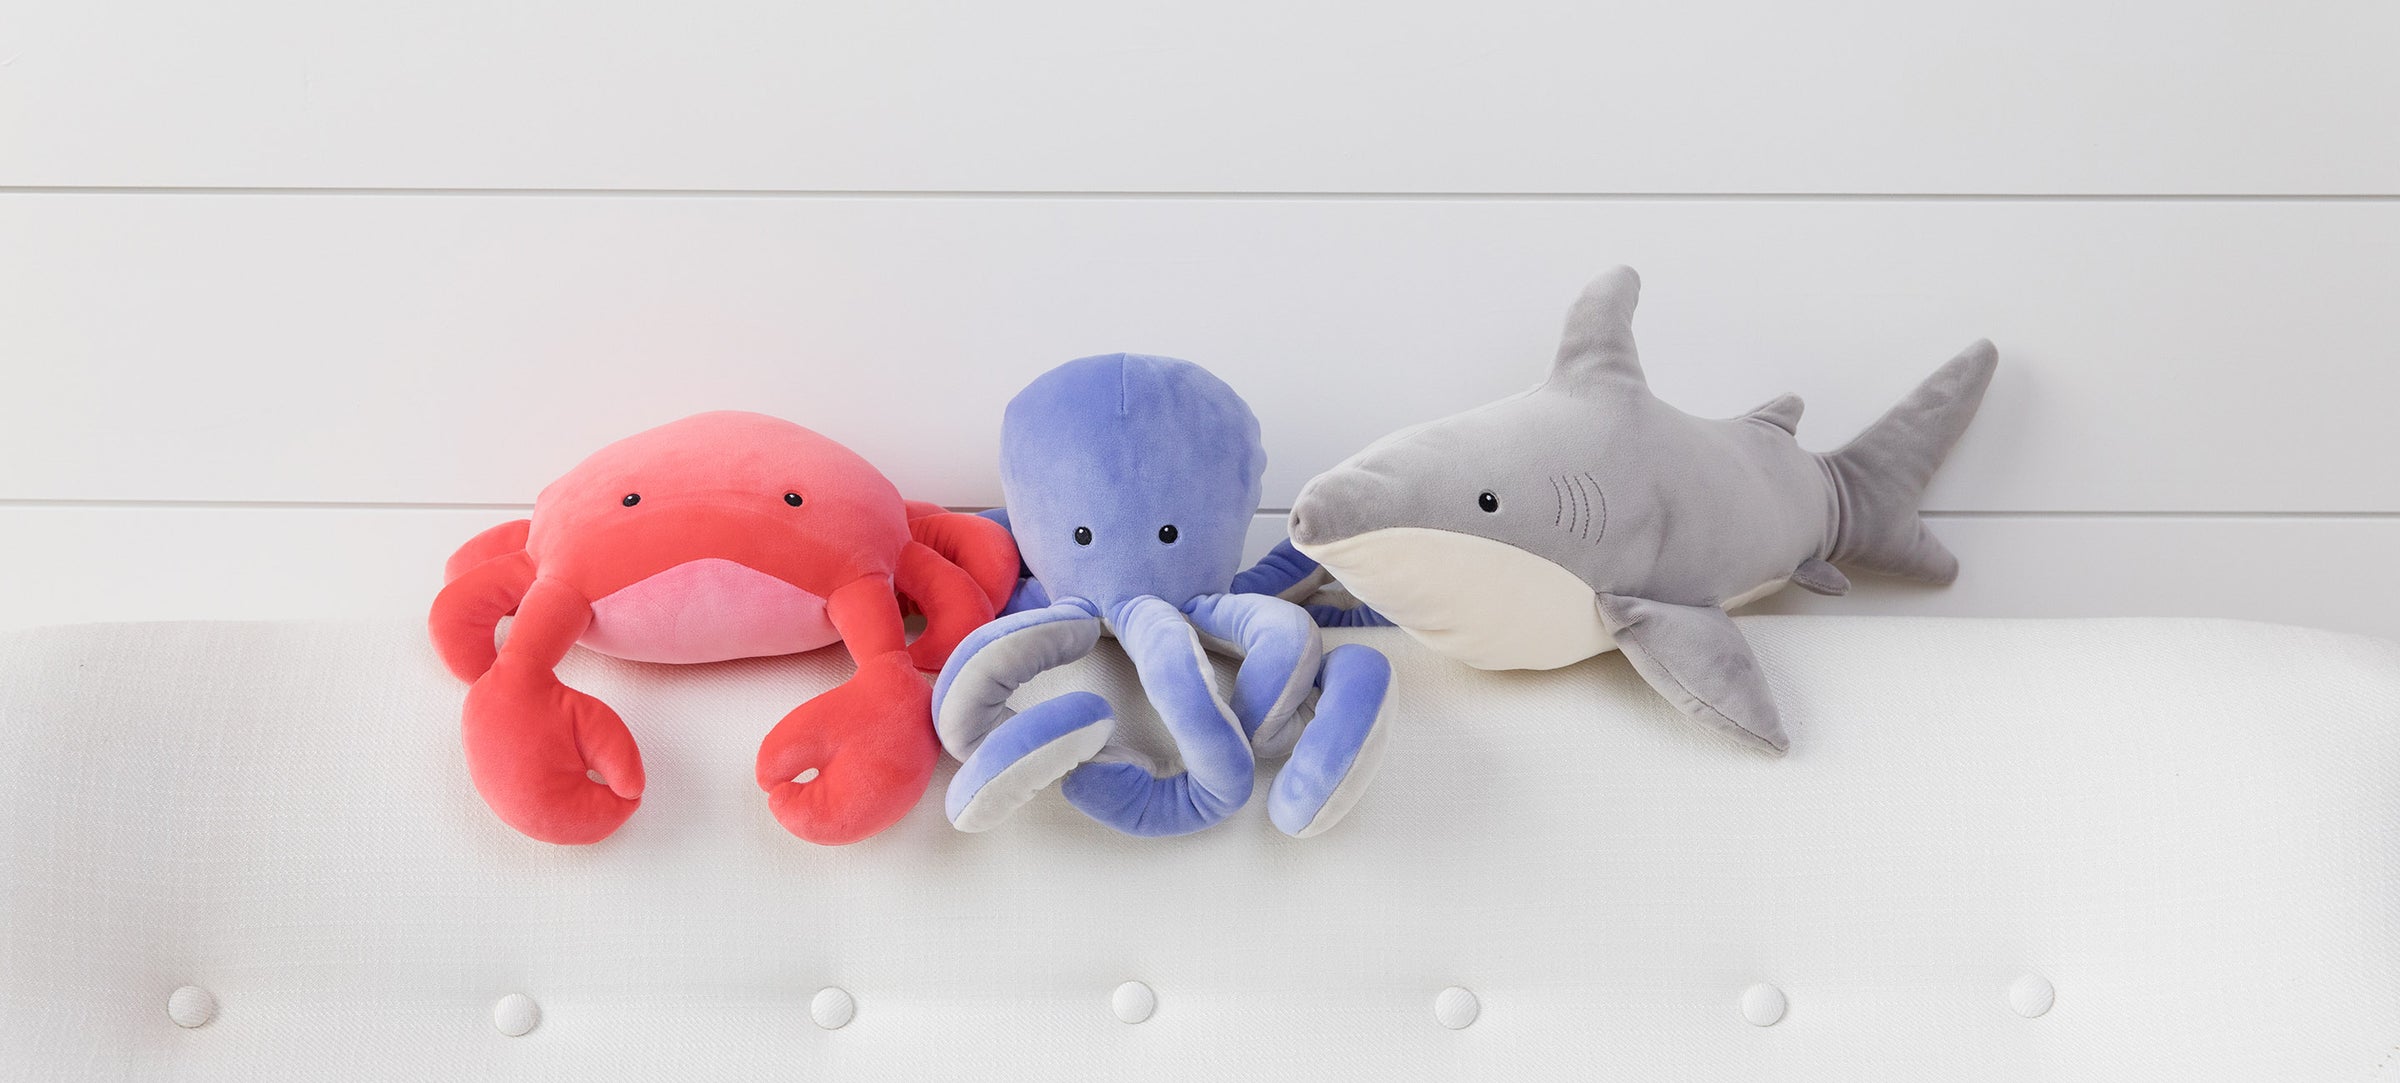 Sea creatures sitting on bed headboard against shiplap wall